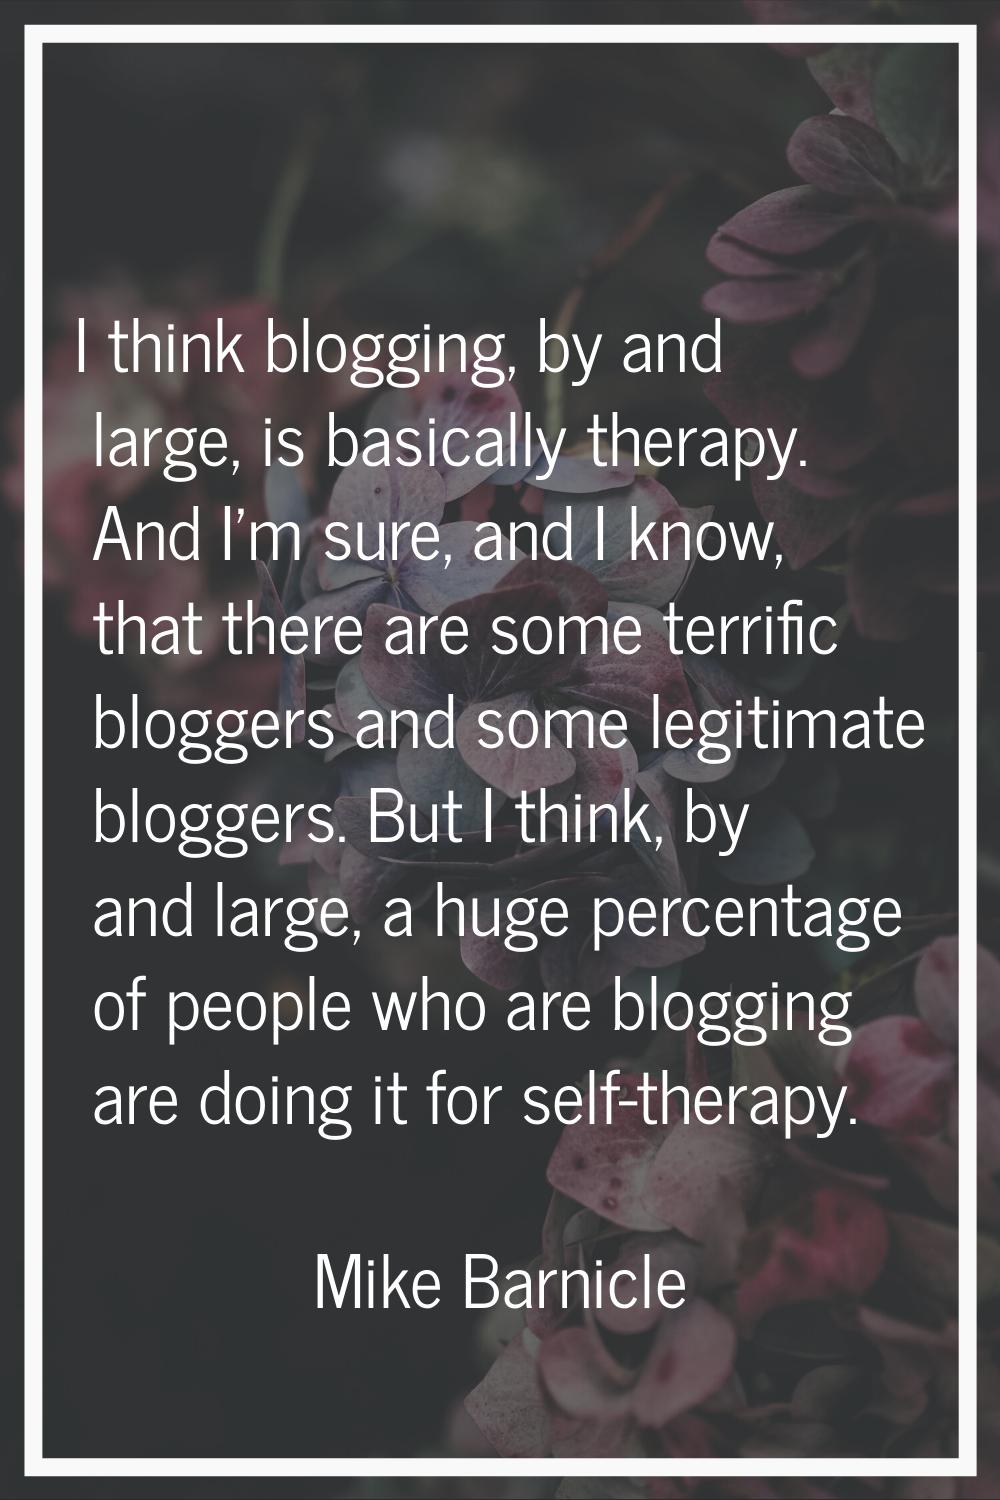 I think blogging, by and large, is basically therapy. And I'm sure, and I know, that there are some